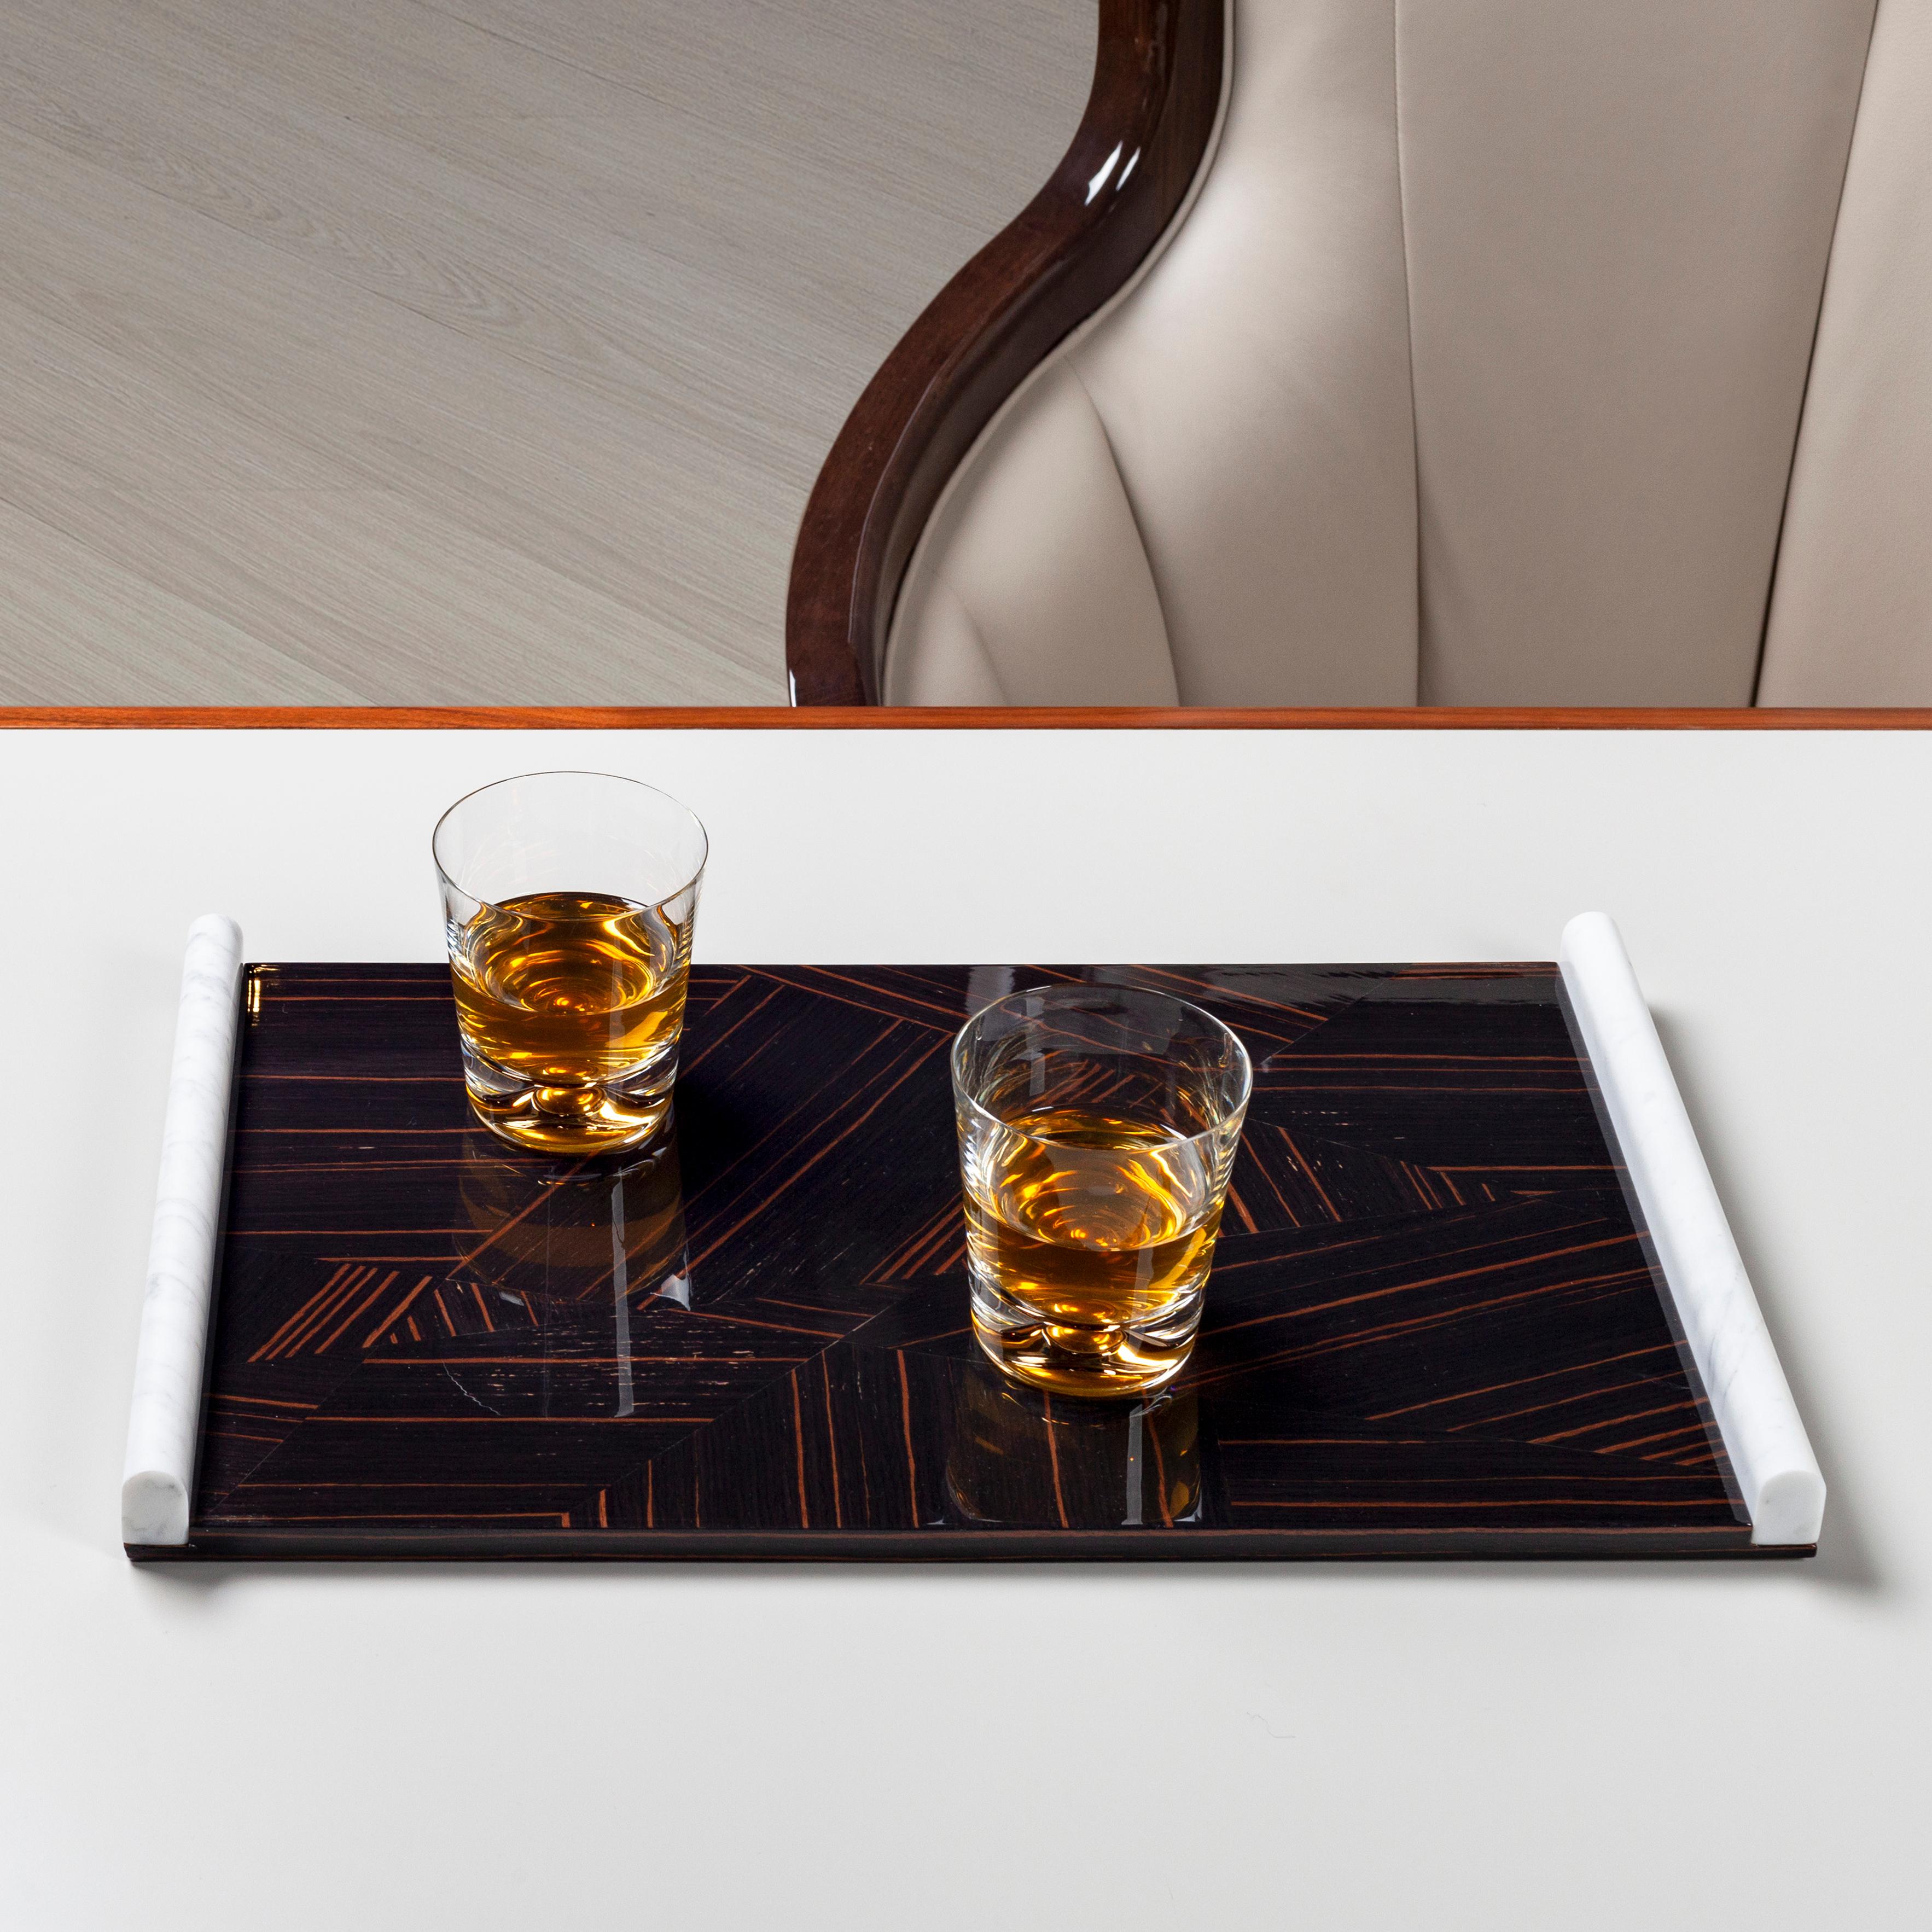 Contemporary Modern Serving Tray Calacatta Marble Oak Handmade Portugal Lusitanus Home For Sale